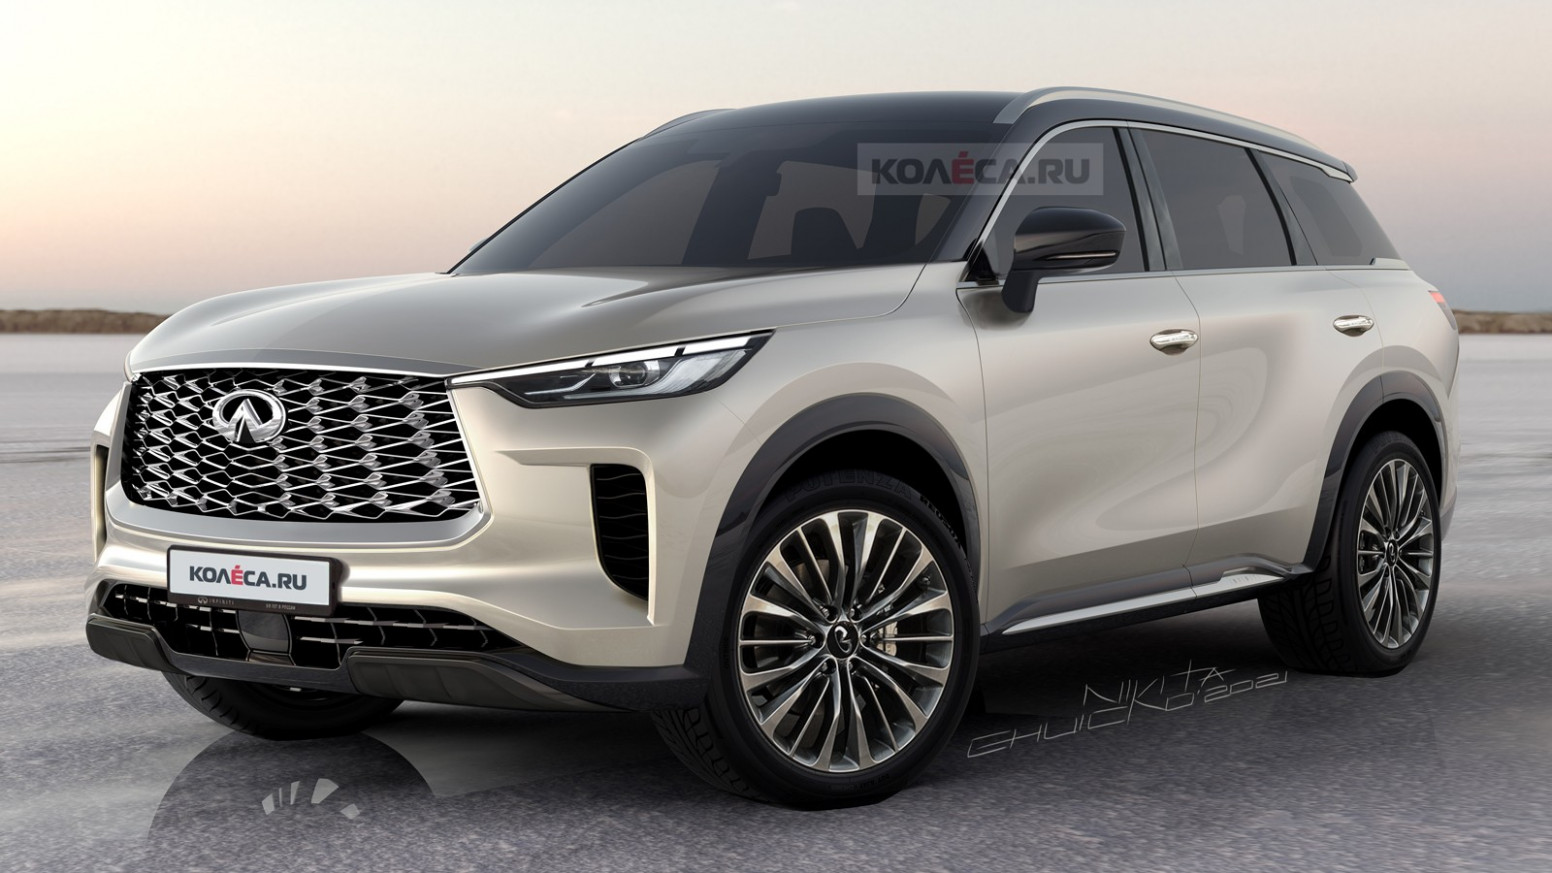 New Model and Performance When Does The 2023 Infiniti Qx60 Come Out